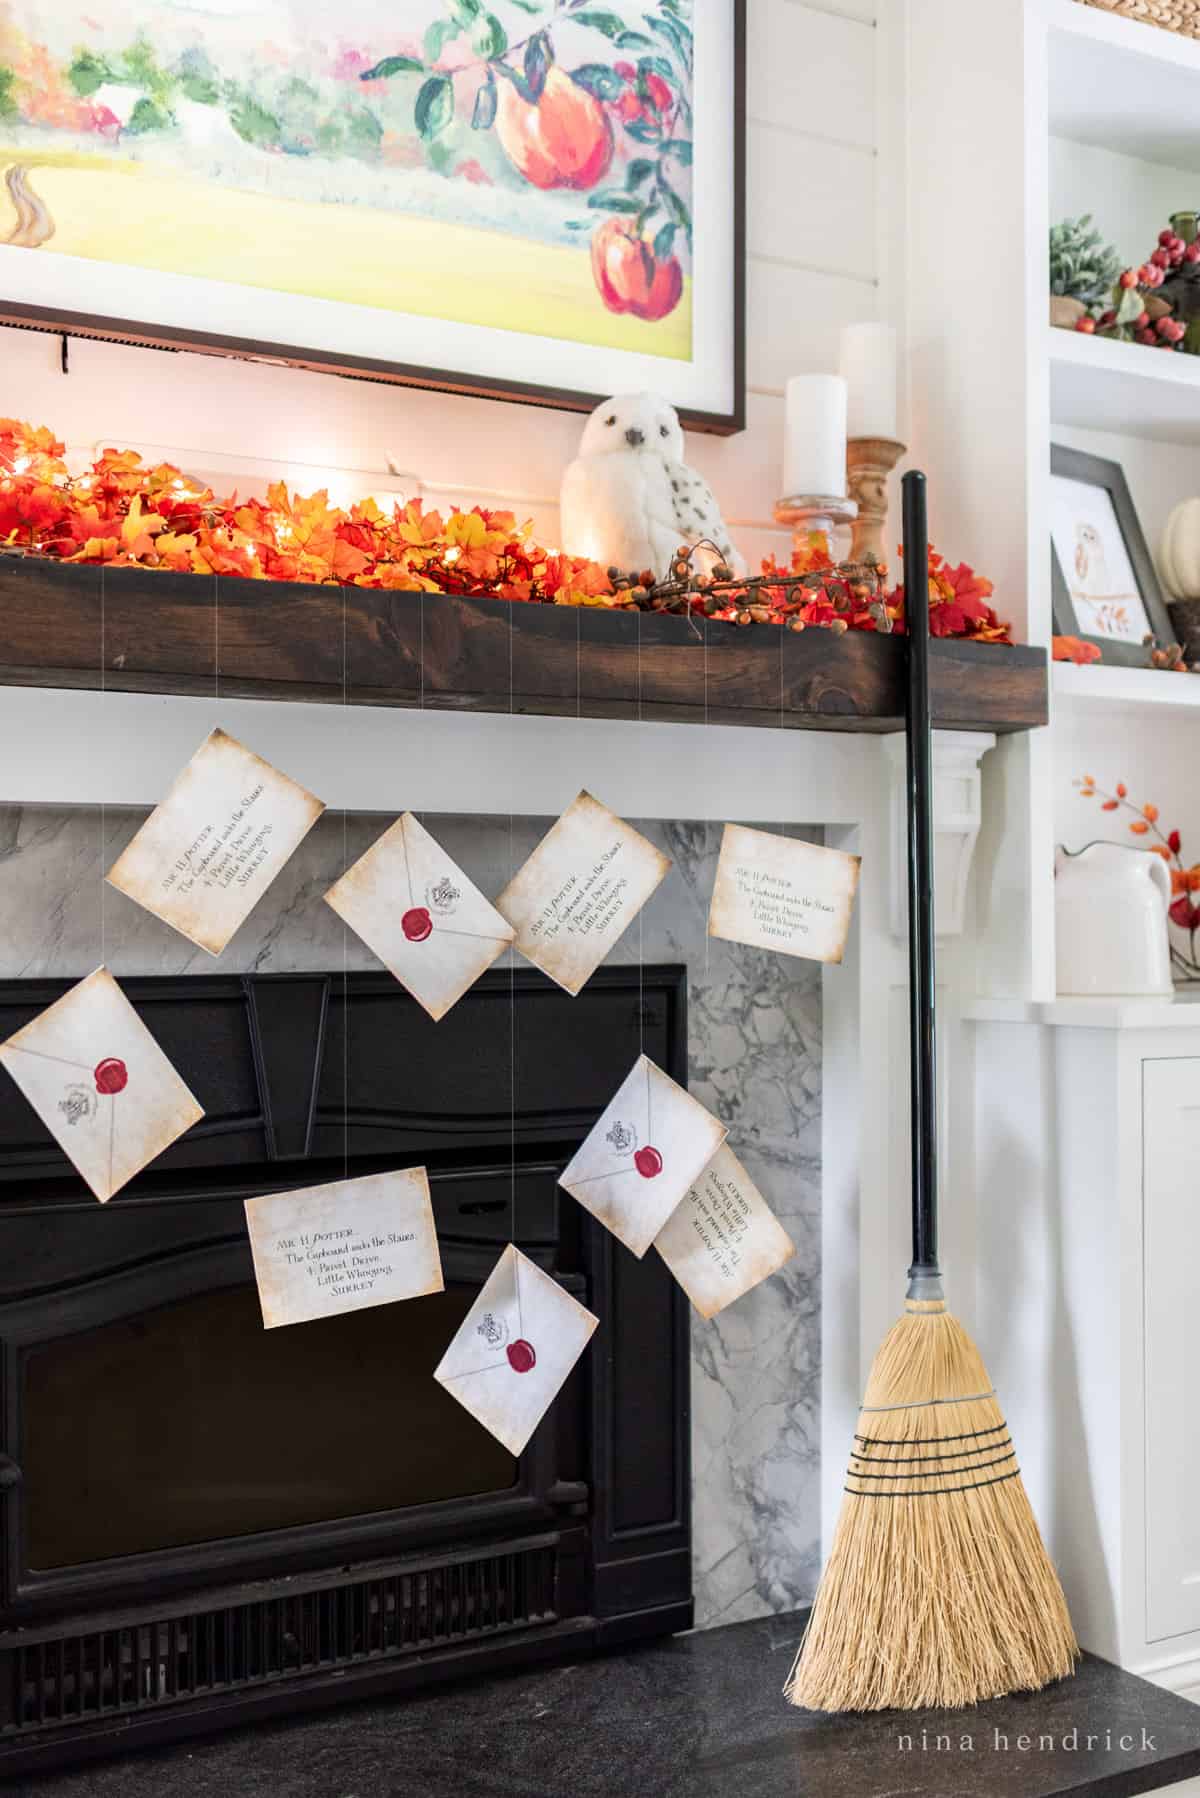 A mantle adorned with a broom, fall cards, and a Hogwarts acceptance letter.